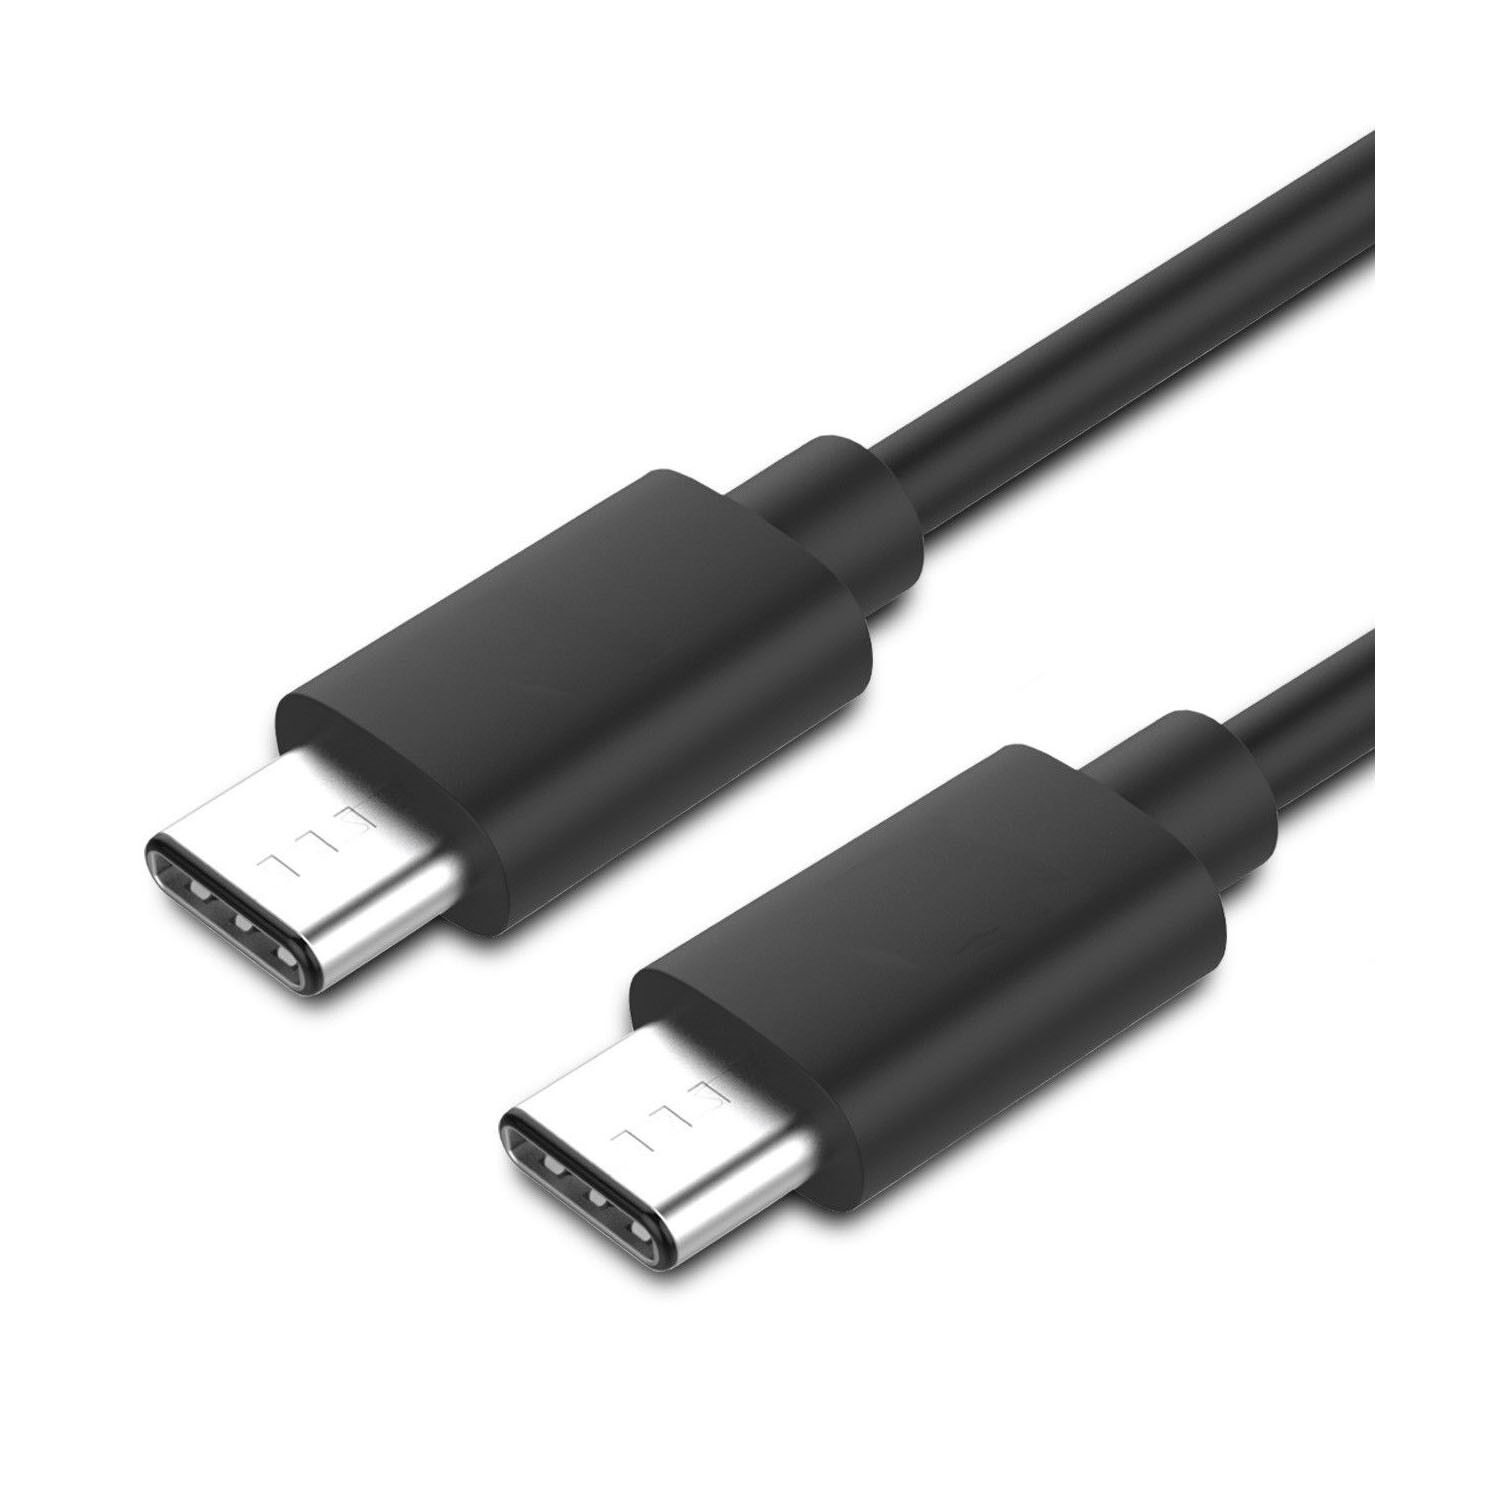 Type C Cable for Crucial X8 1TB Portable SSD CT1000X8SSD9 Hard Drive